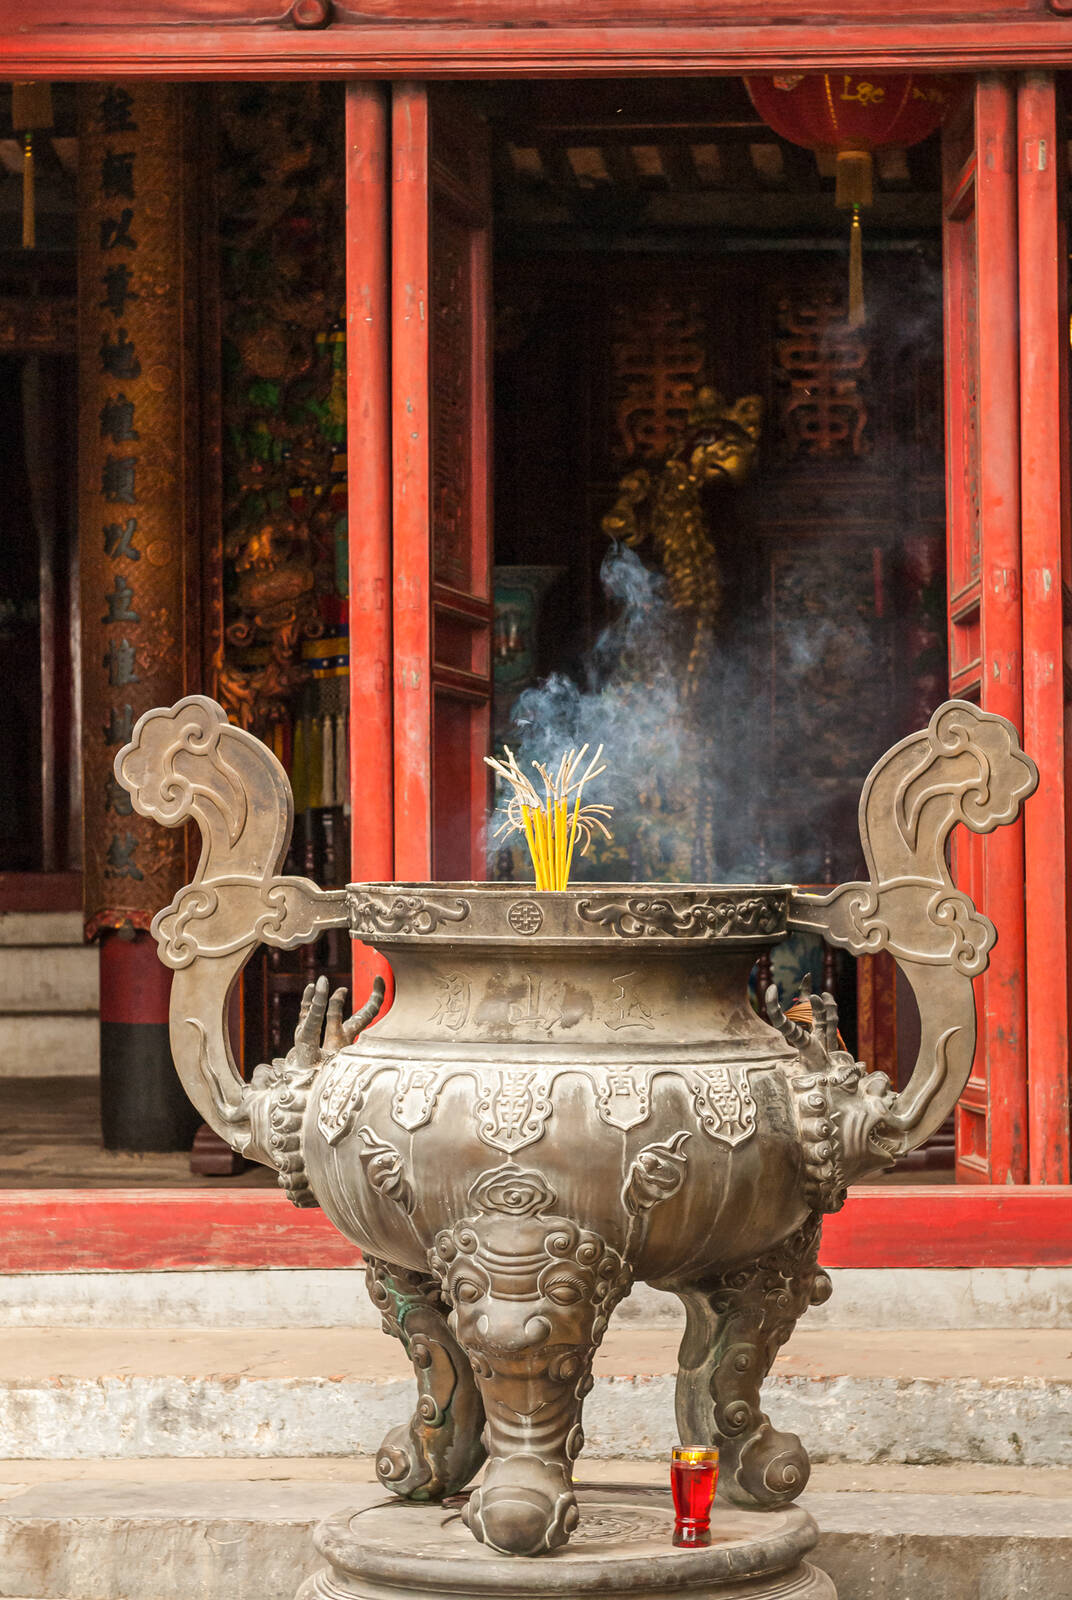 Image of Ngoc Son Temple by Sue Wolfe